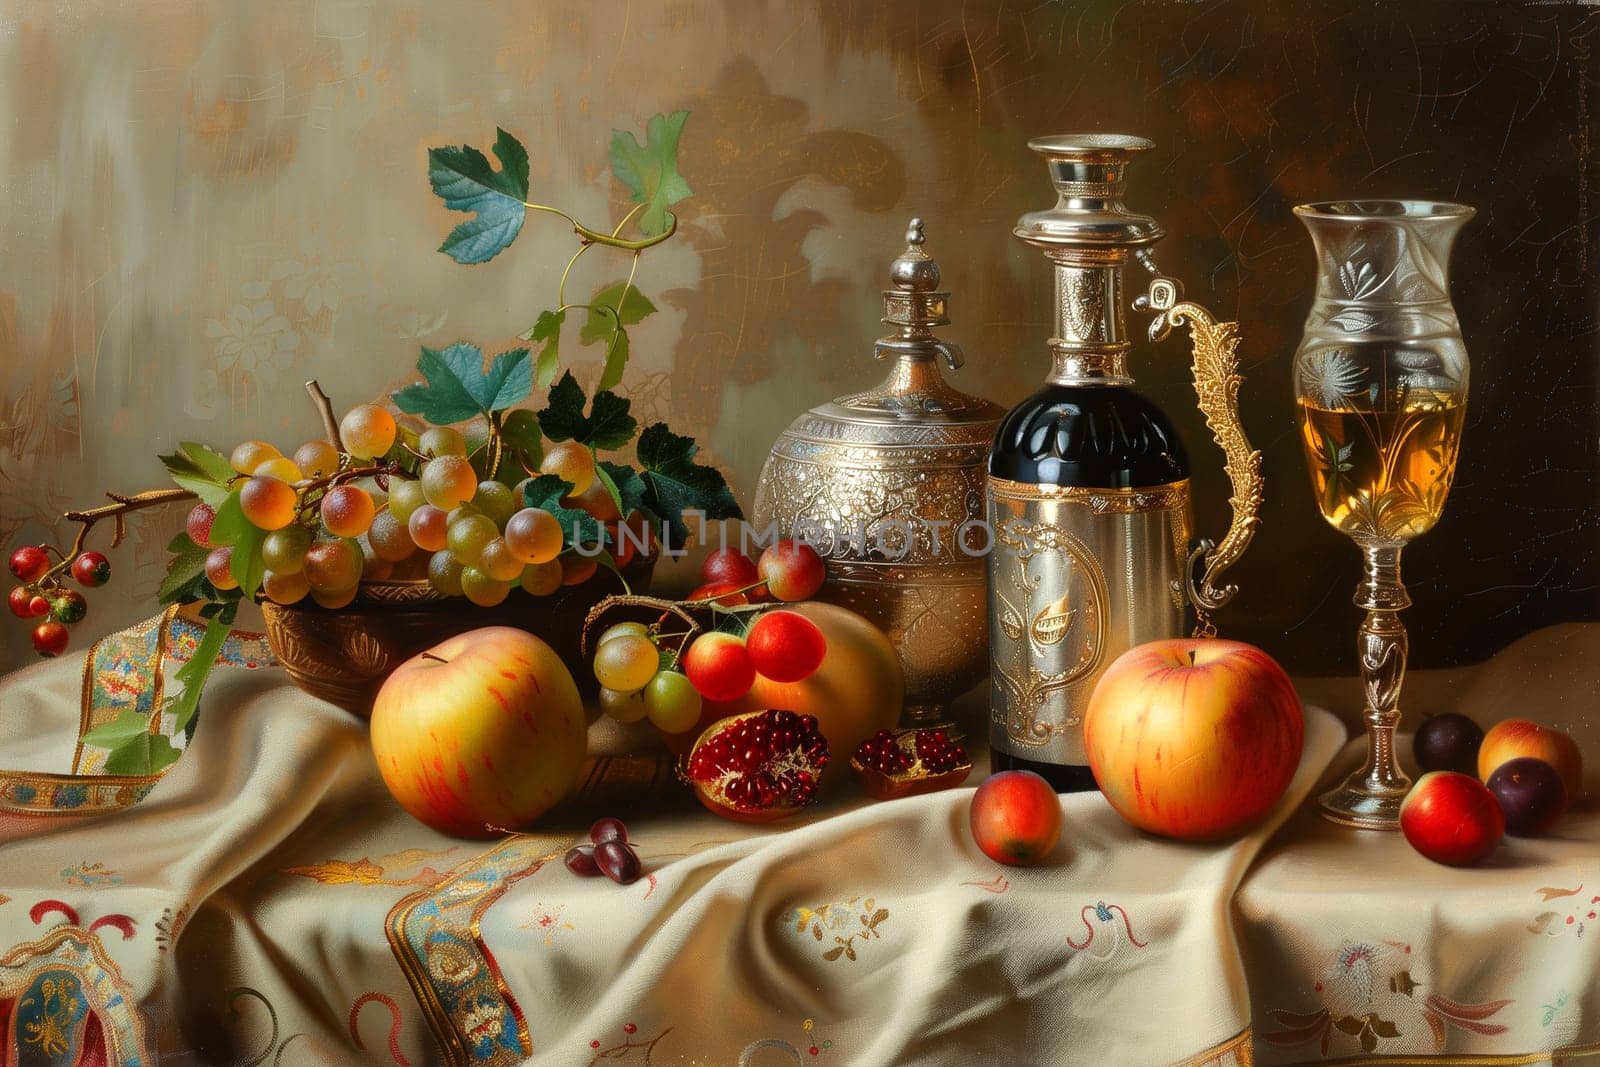 A festive Shavuot arrangement with fresh fruits, a bottle of wine, a silver pitcher, a glass, and intricate textiles, embodying the holidays spirit.